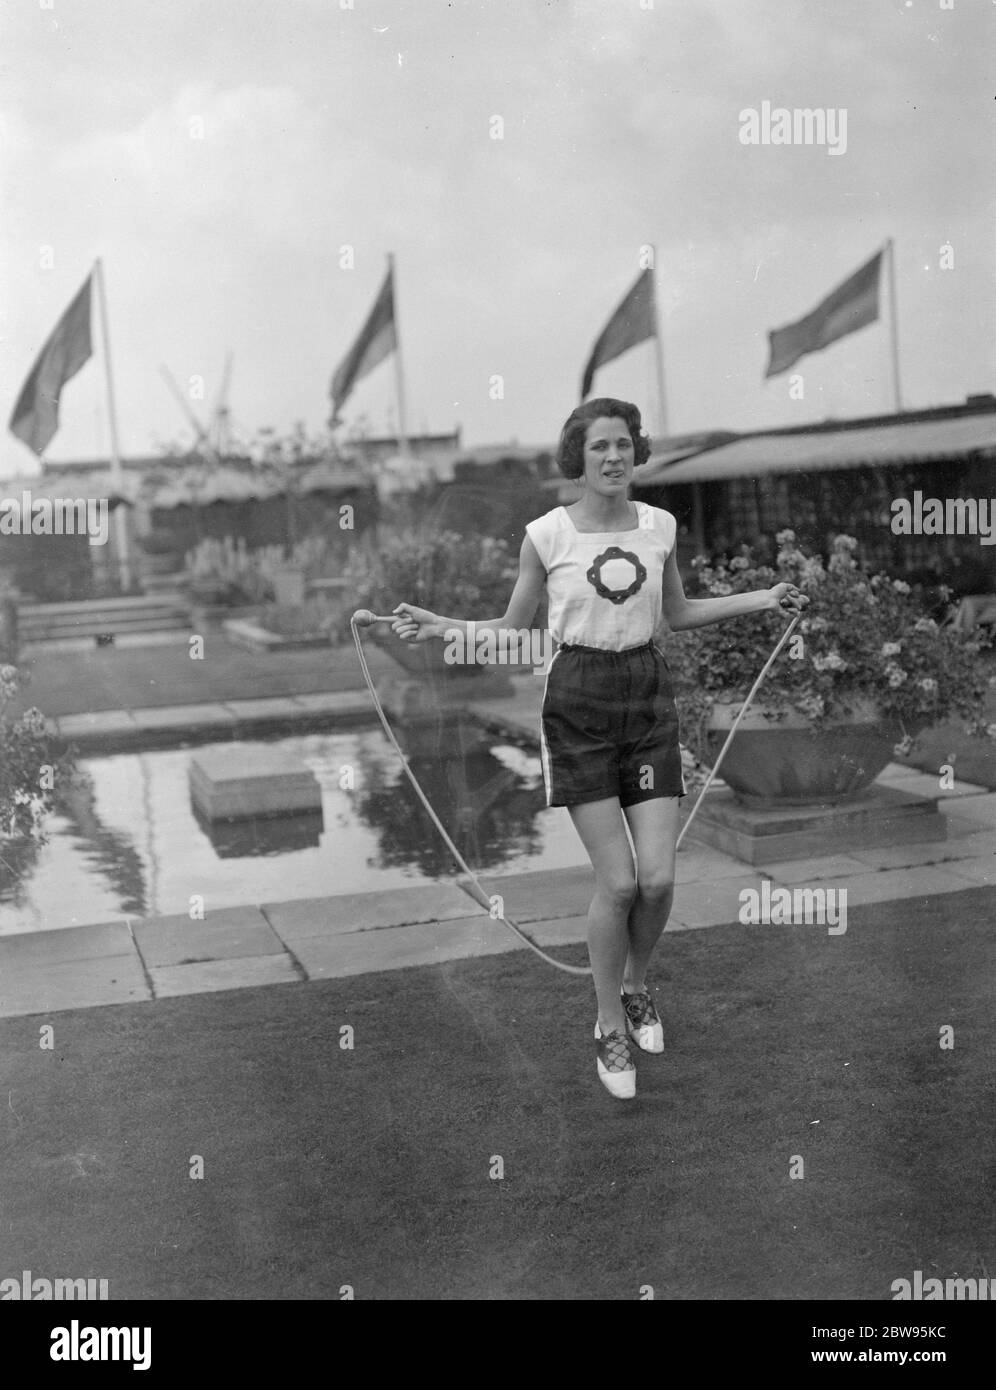 Olympic Games representative practices at lunch time on roof on store . Miss Violet Webb , who has been chosen to represent Great Britain in the hurdles at the Olympic Games at Los Angeles , USA practices every lunch hour on the roof of Selfridges store , where she is employed . Miss Violet Webb skipping during her roof lunch hour practice . 22 June 1932 Stock Photo